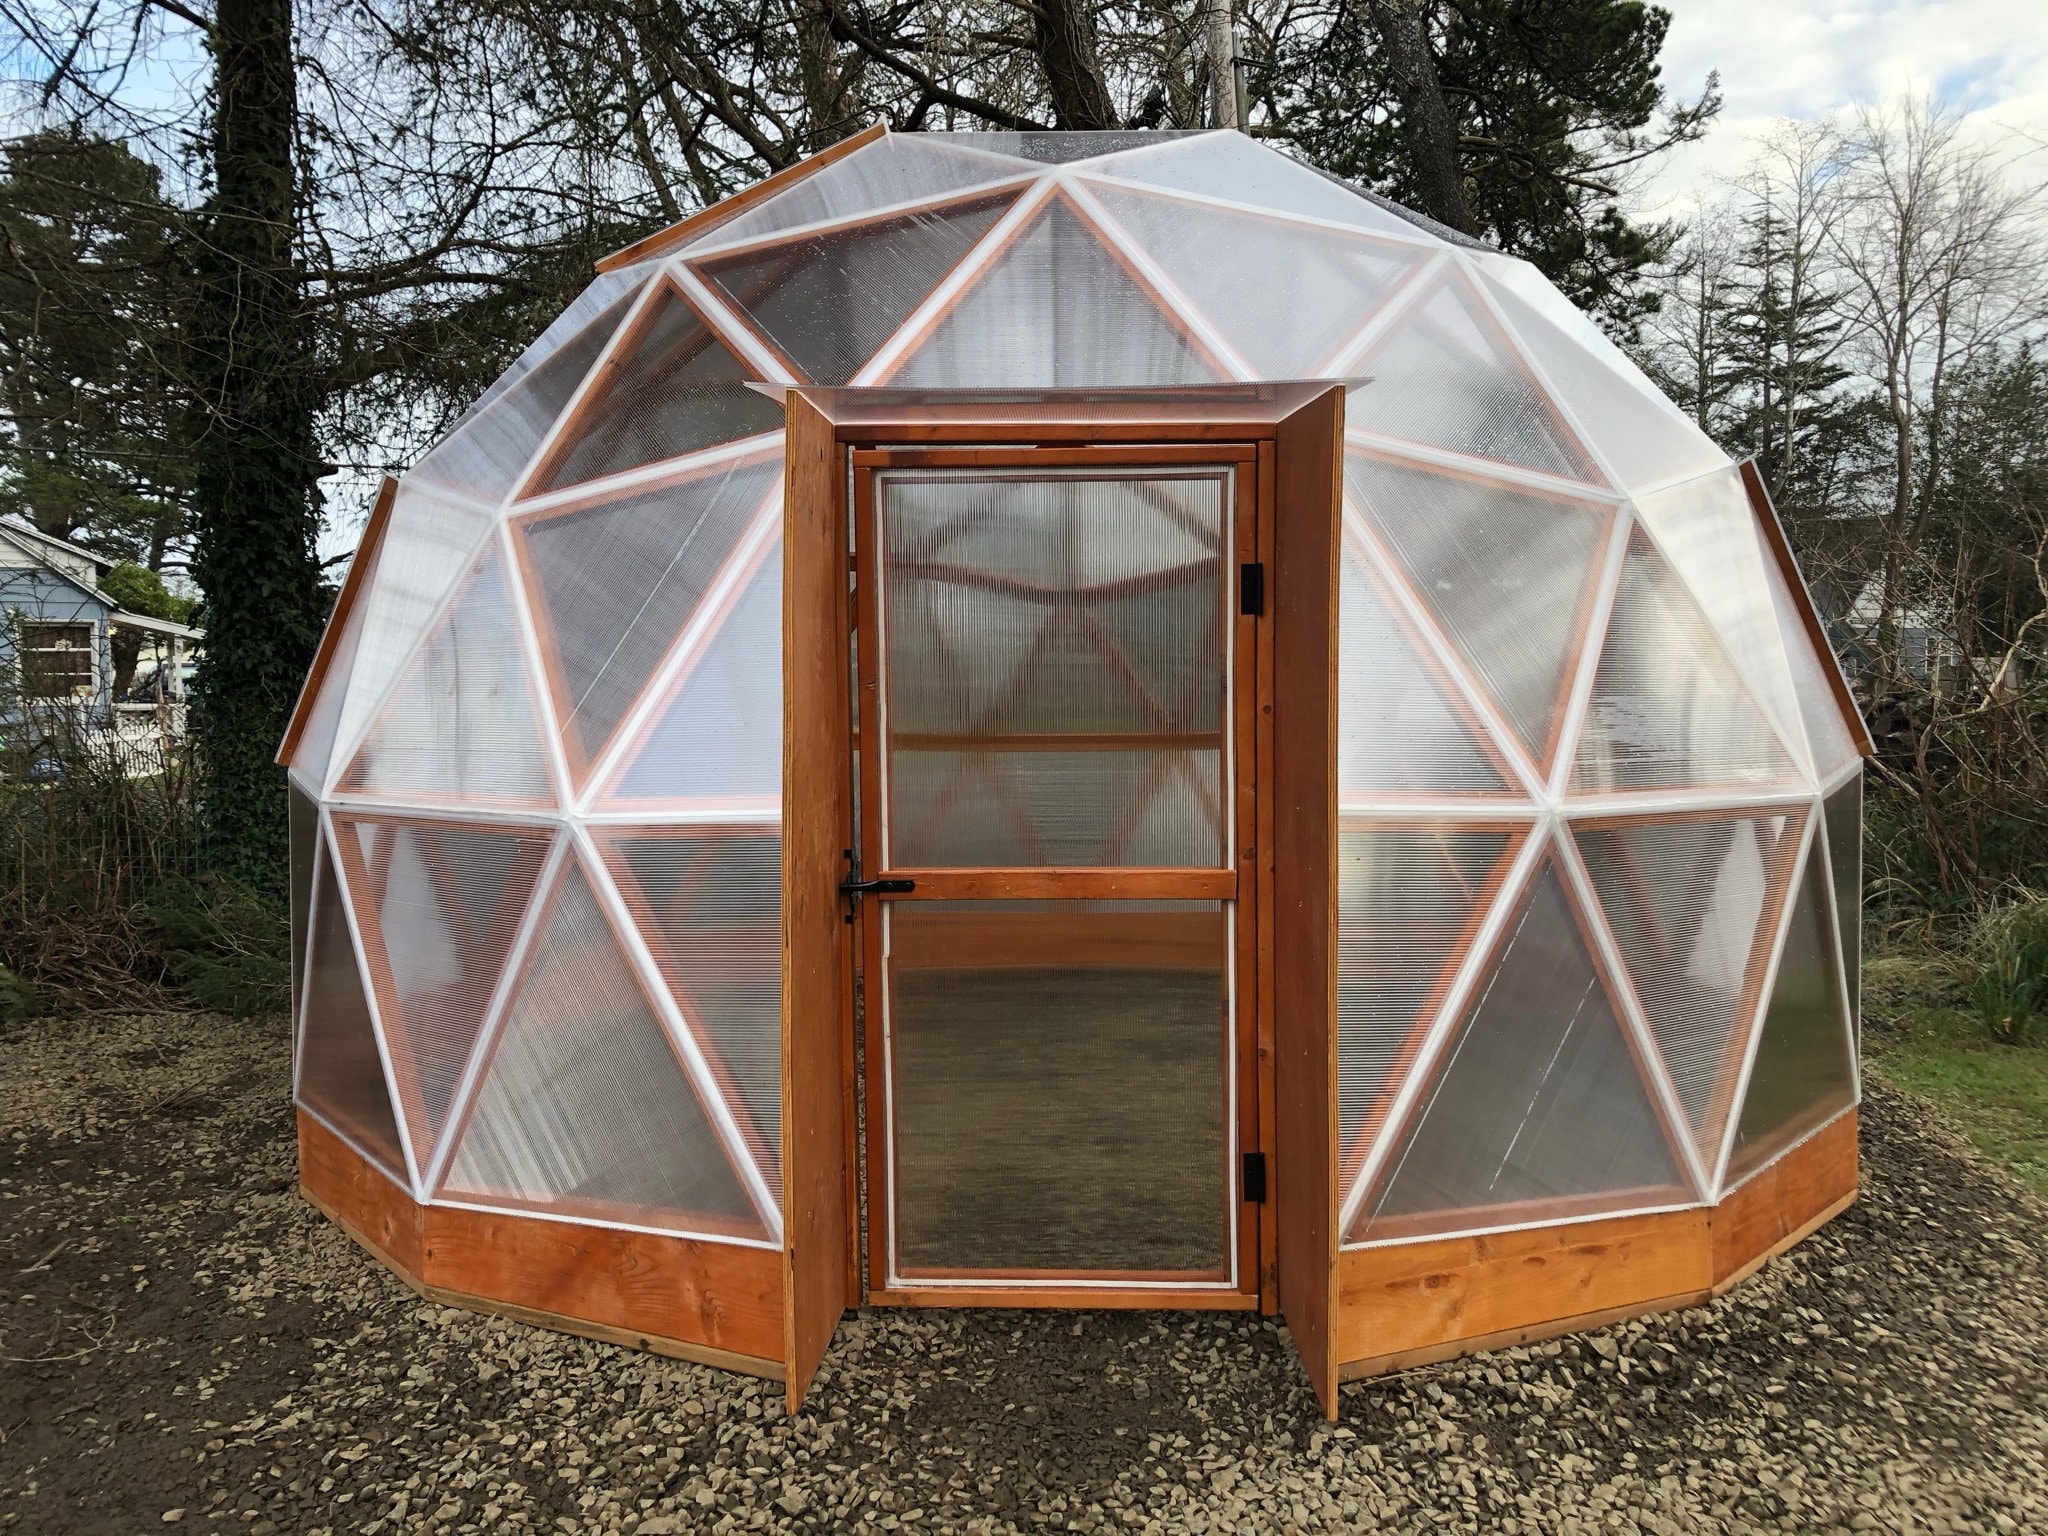 Large Outdoor Geodesic Yoga Dome Home丨 Play Dome Construction Hub